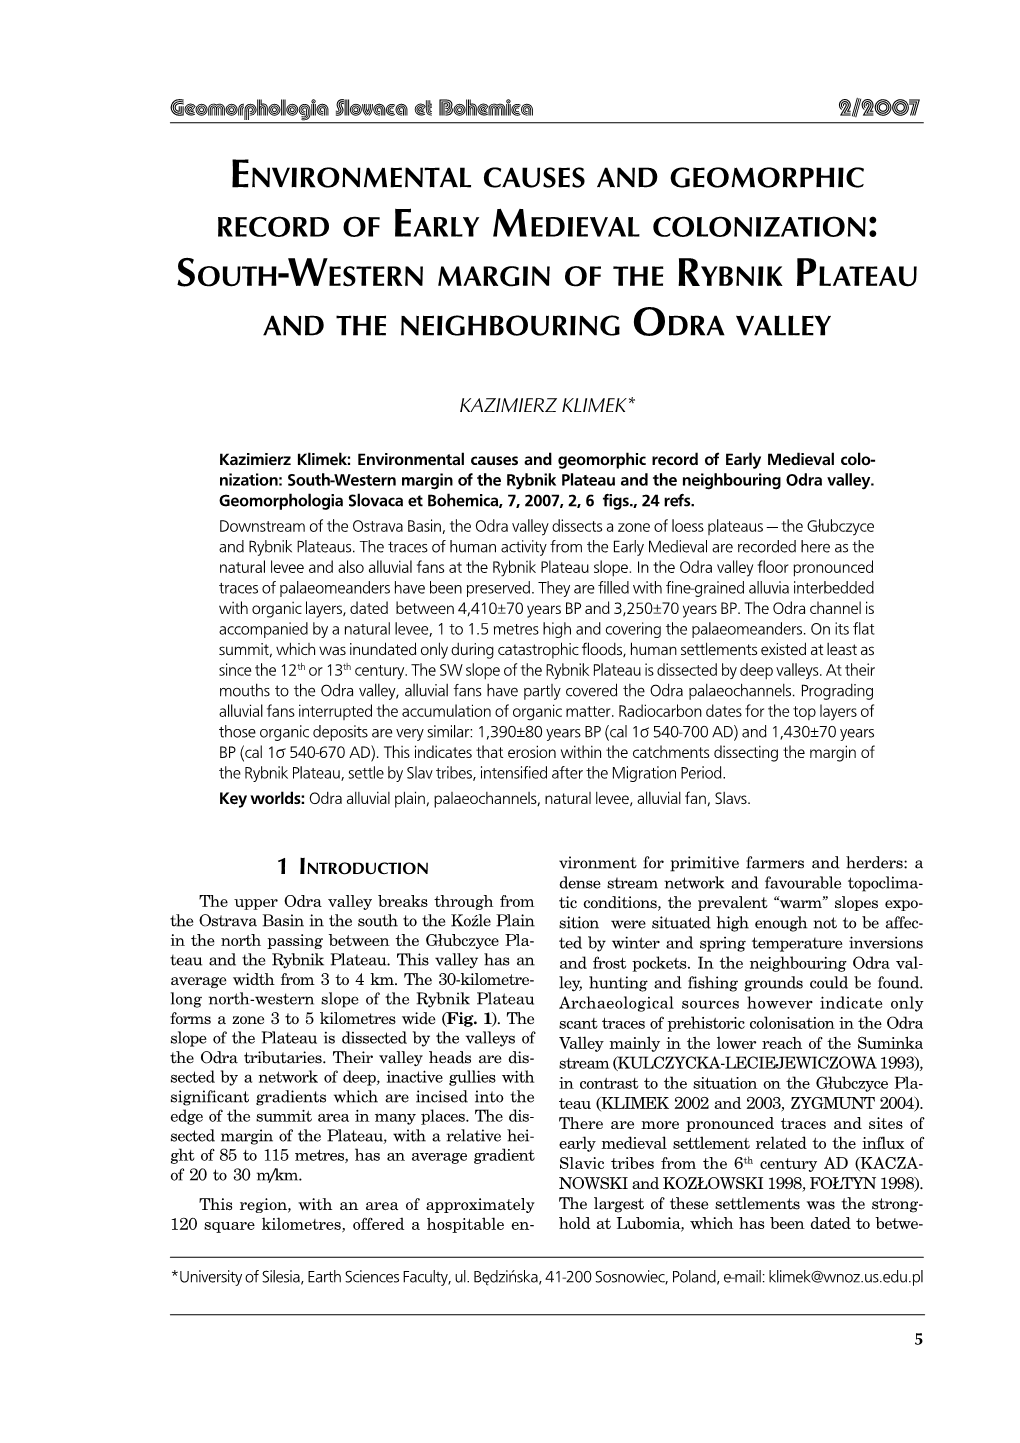 Environmental Causes and Geomorphic Record of Early Medieval Colonization: South-Western Margin of the Rybnik Plateau and the Neighbouring Odra Valley